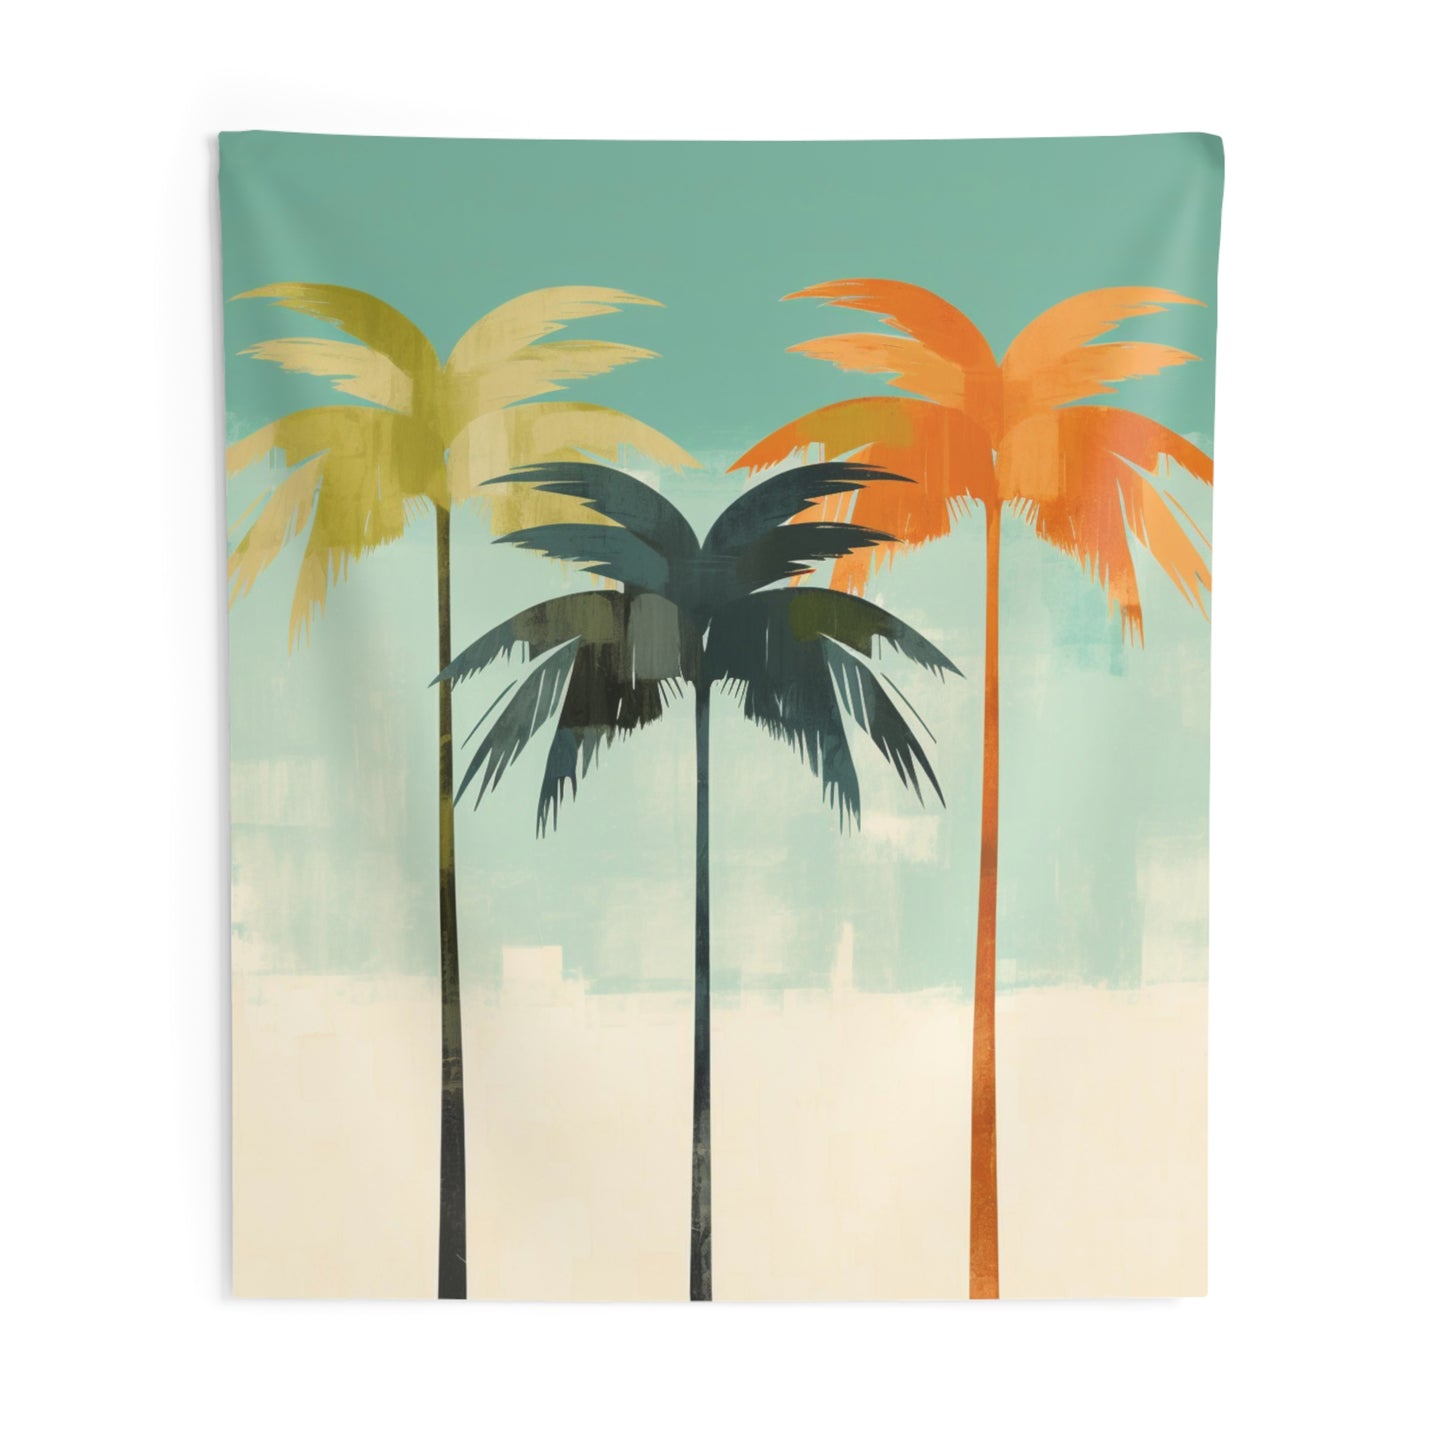 Palm Trees Tapestry, Minimalist Boho Abstract Wall Art Hanging Cool Unique Vertical Aesthetic Large Small Decor Bedroom College Dorm Room Starcove Fashion